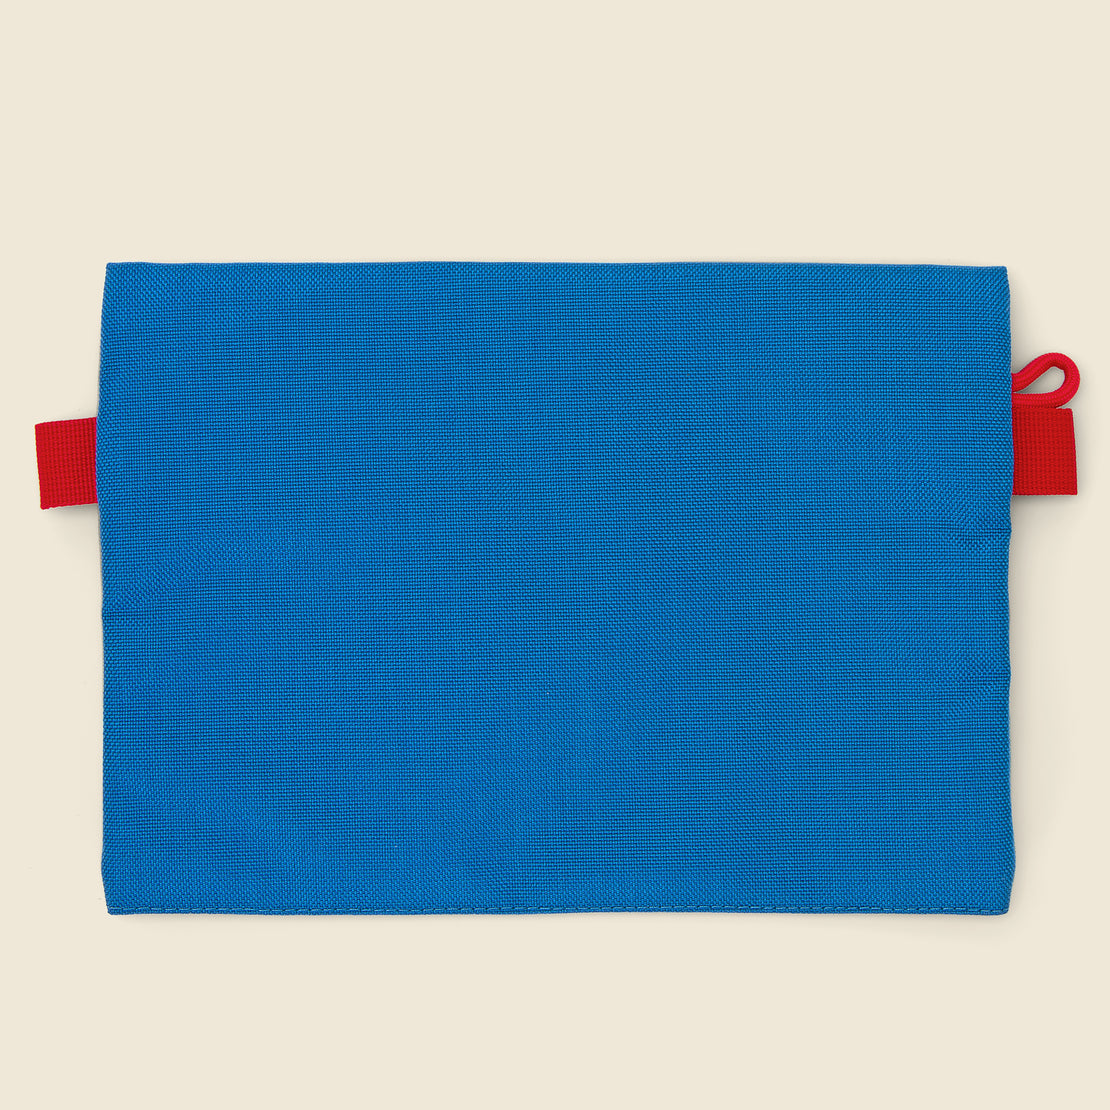 Medium Accessory Bag - Mineral Blue/Blue - Topo Designs - STAG Provisions - Accessories - Bags / Luggage